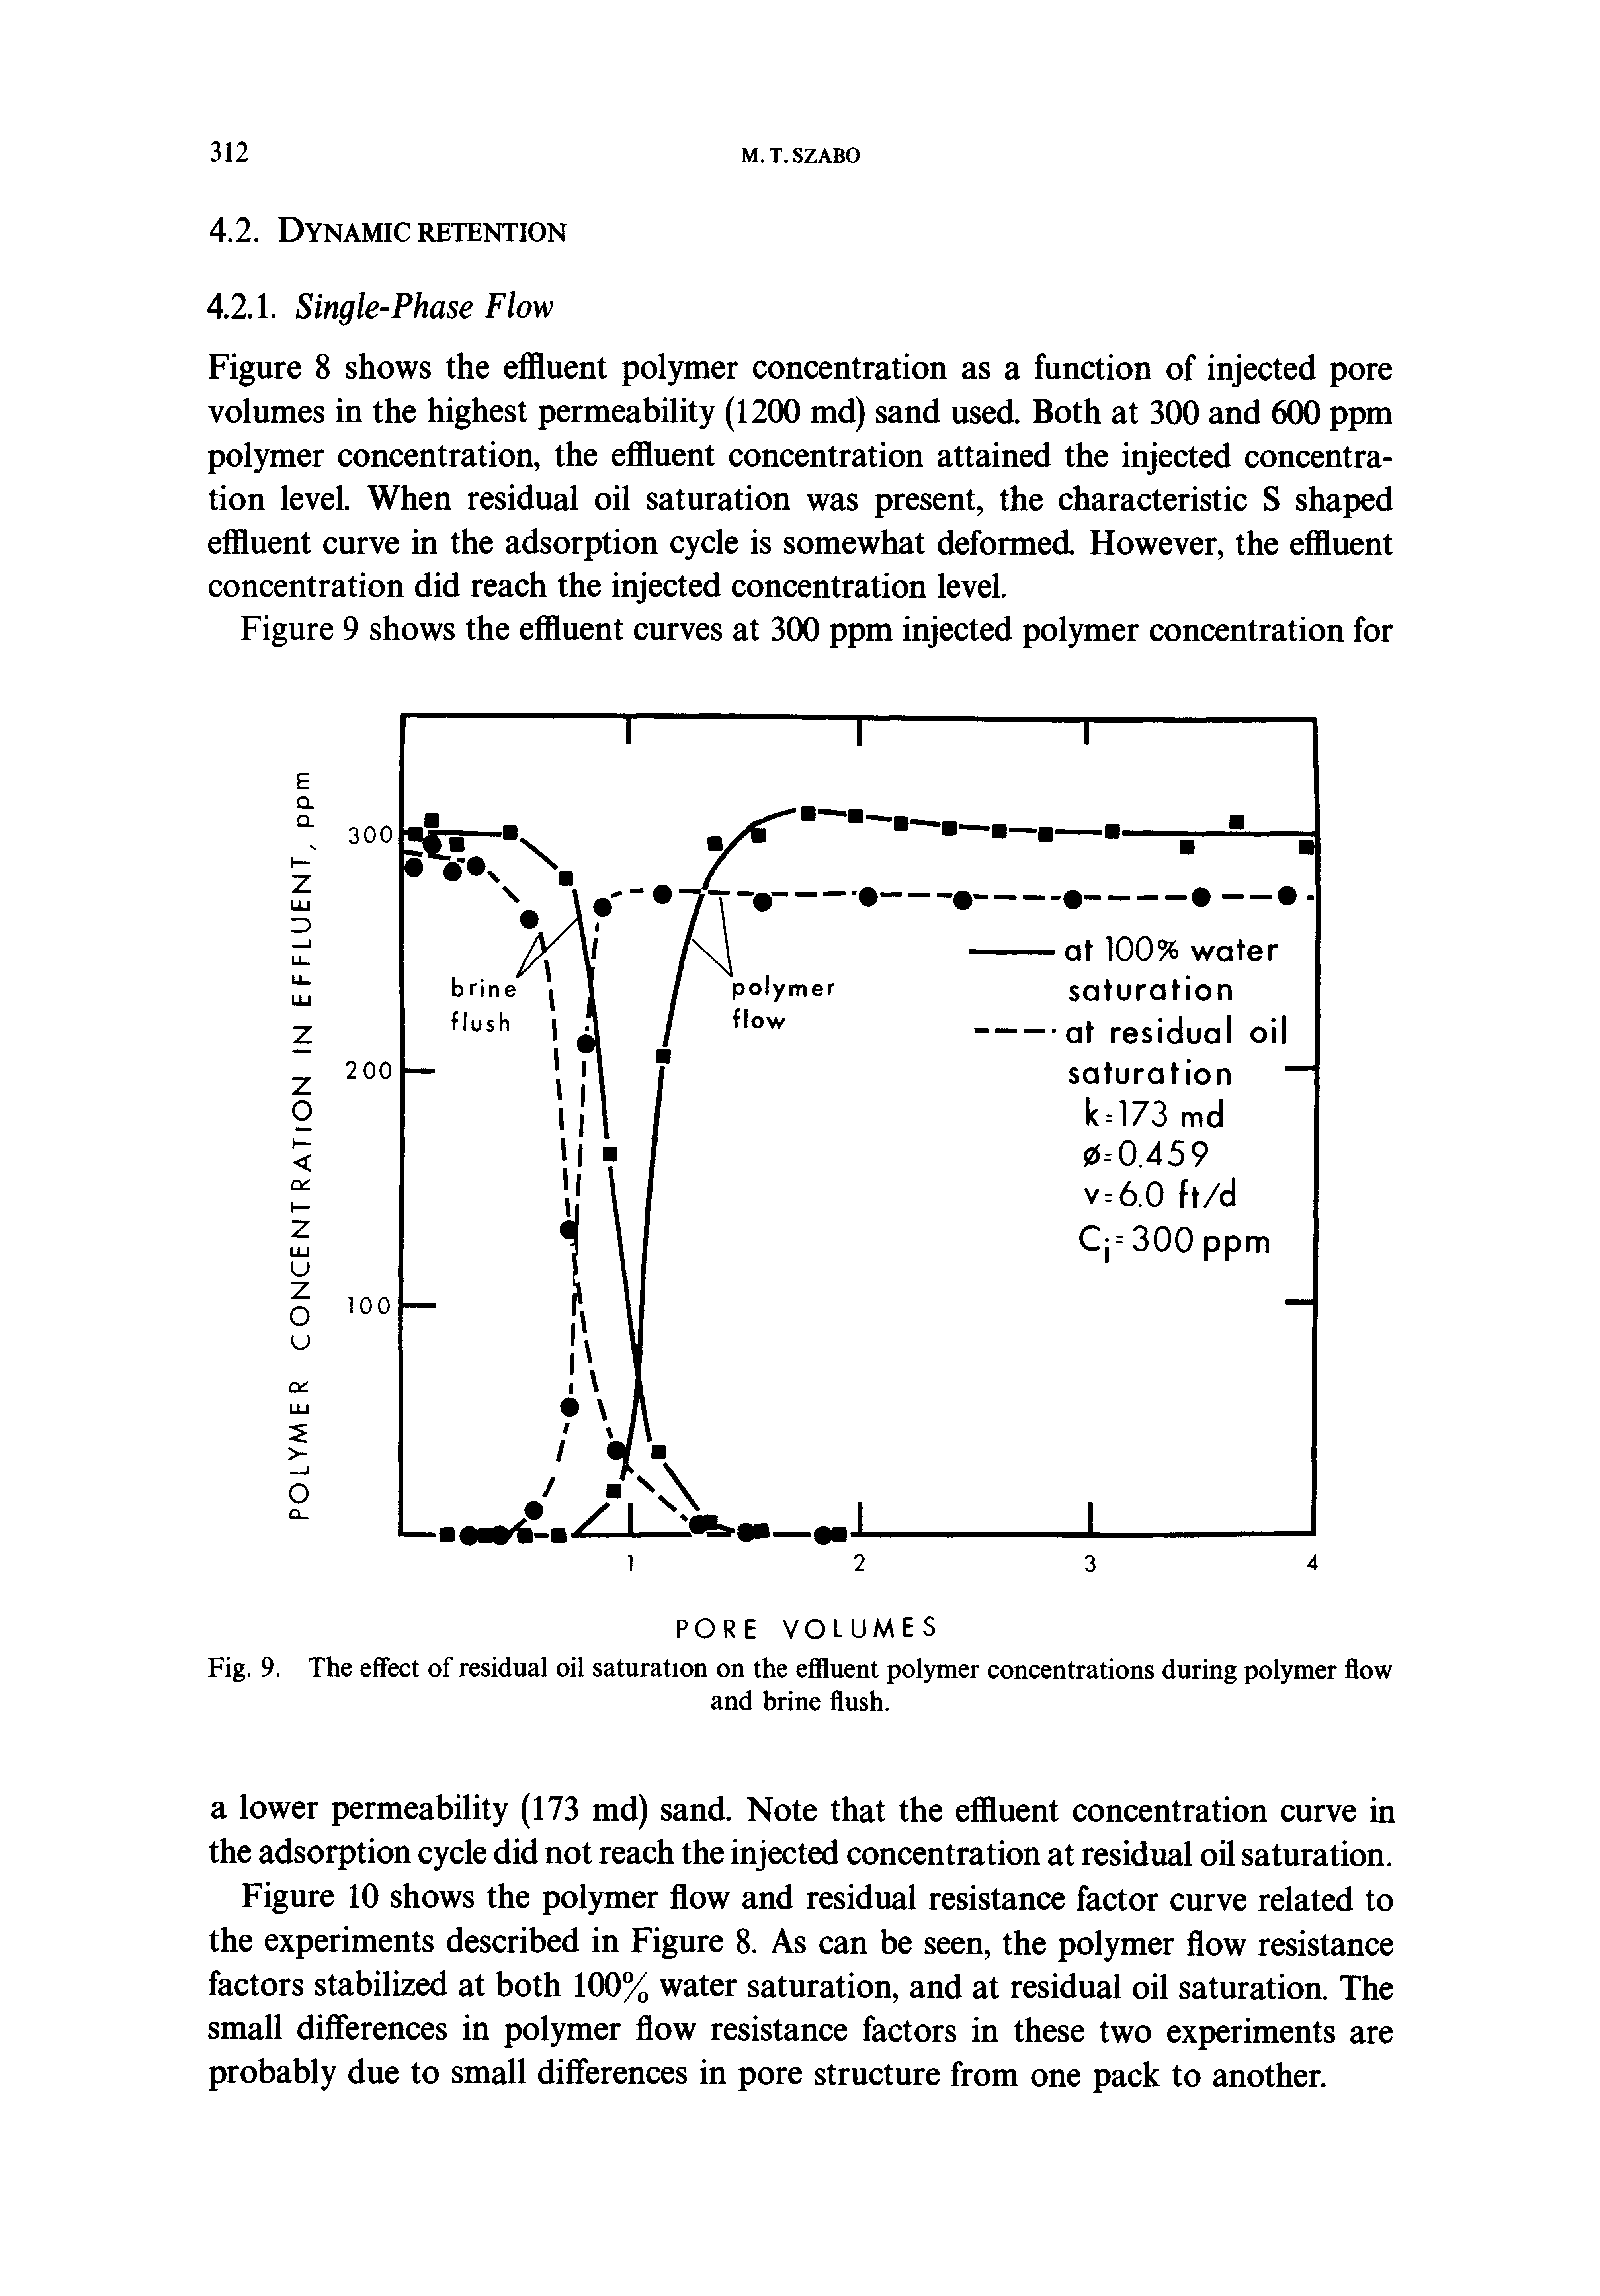 Figure 10 shows the polymer flow and residual resistance factor curve related to the experiments described in Figure 8. As can be seen, the polymer flow resistance factors stabilized at both 100% water saturation, and at residual oil saturation. The small differences in polymer flow resistance factors in these two experiments are probably due to small differences in pore structure from one pack to another.